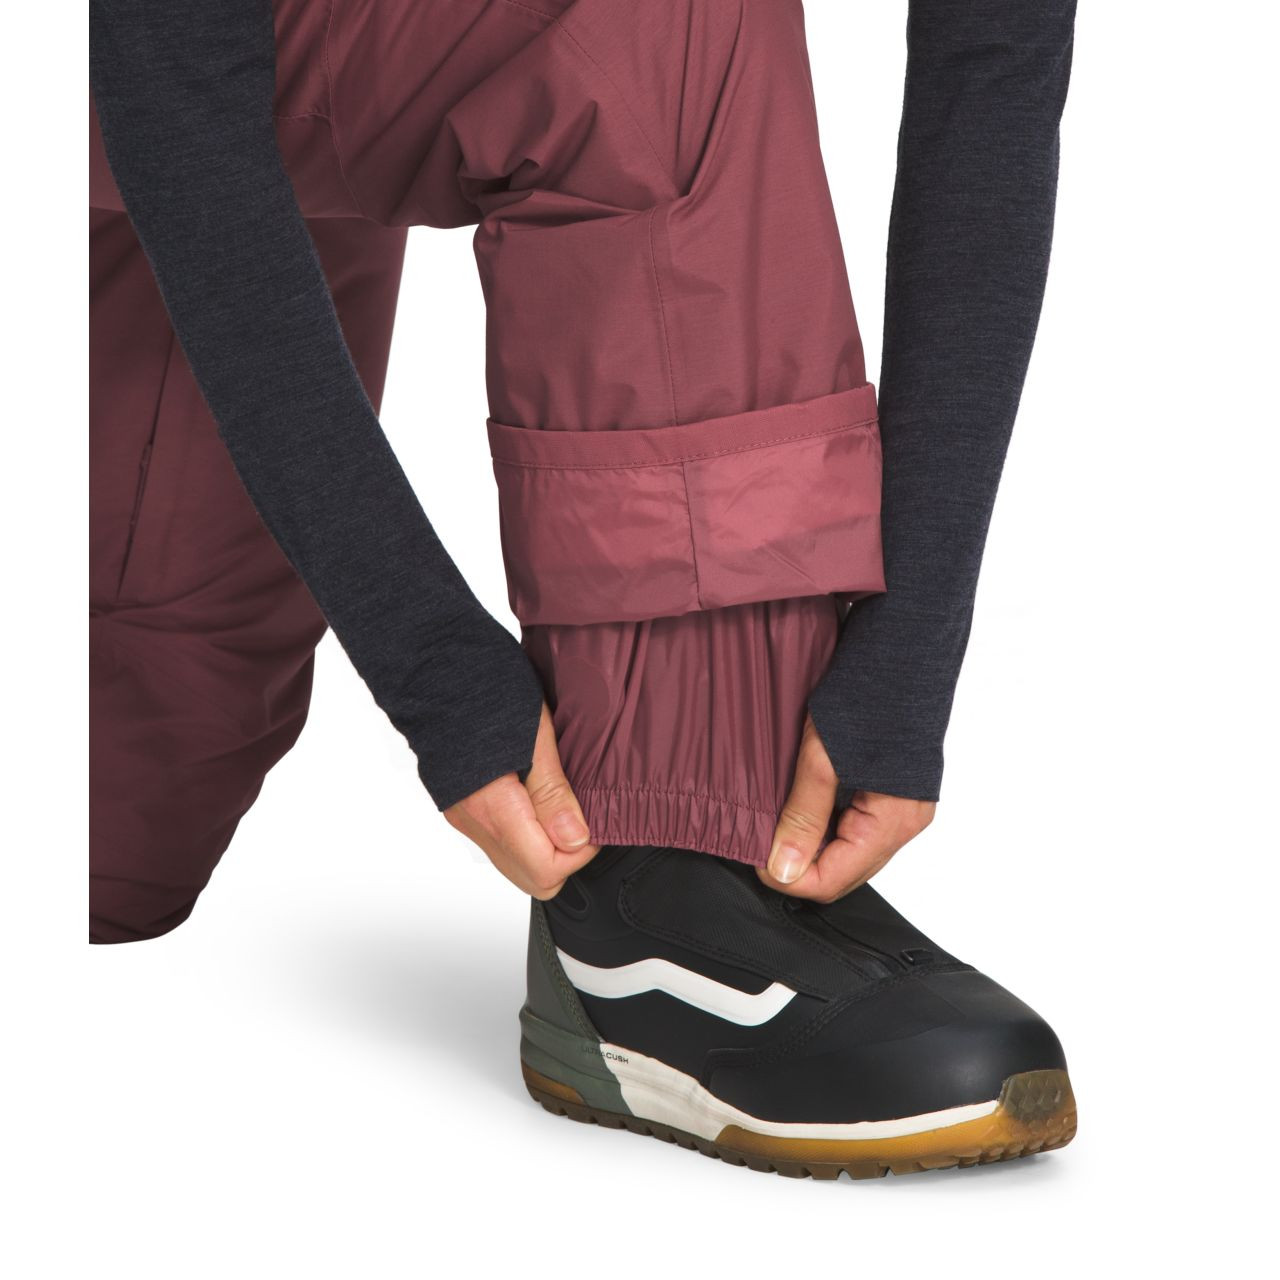 The North Face Freedom Insulated Plus Pants - Women's